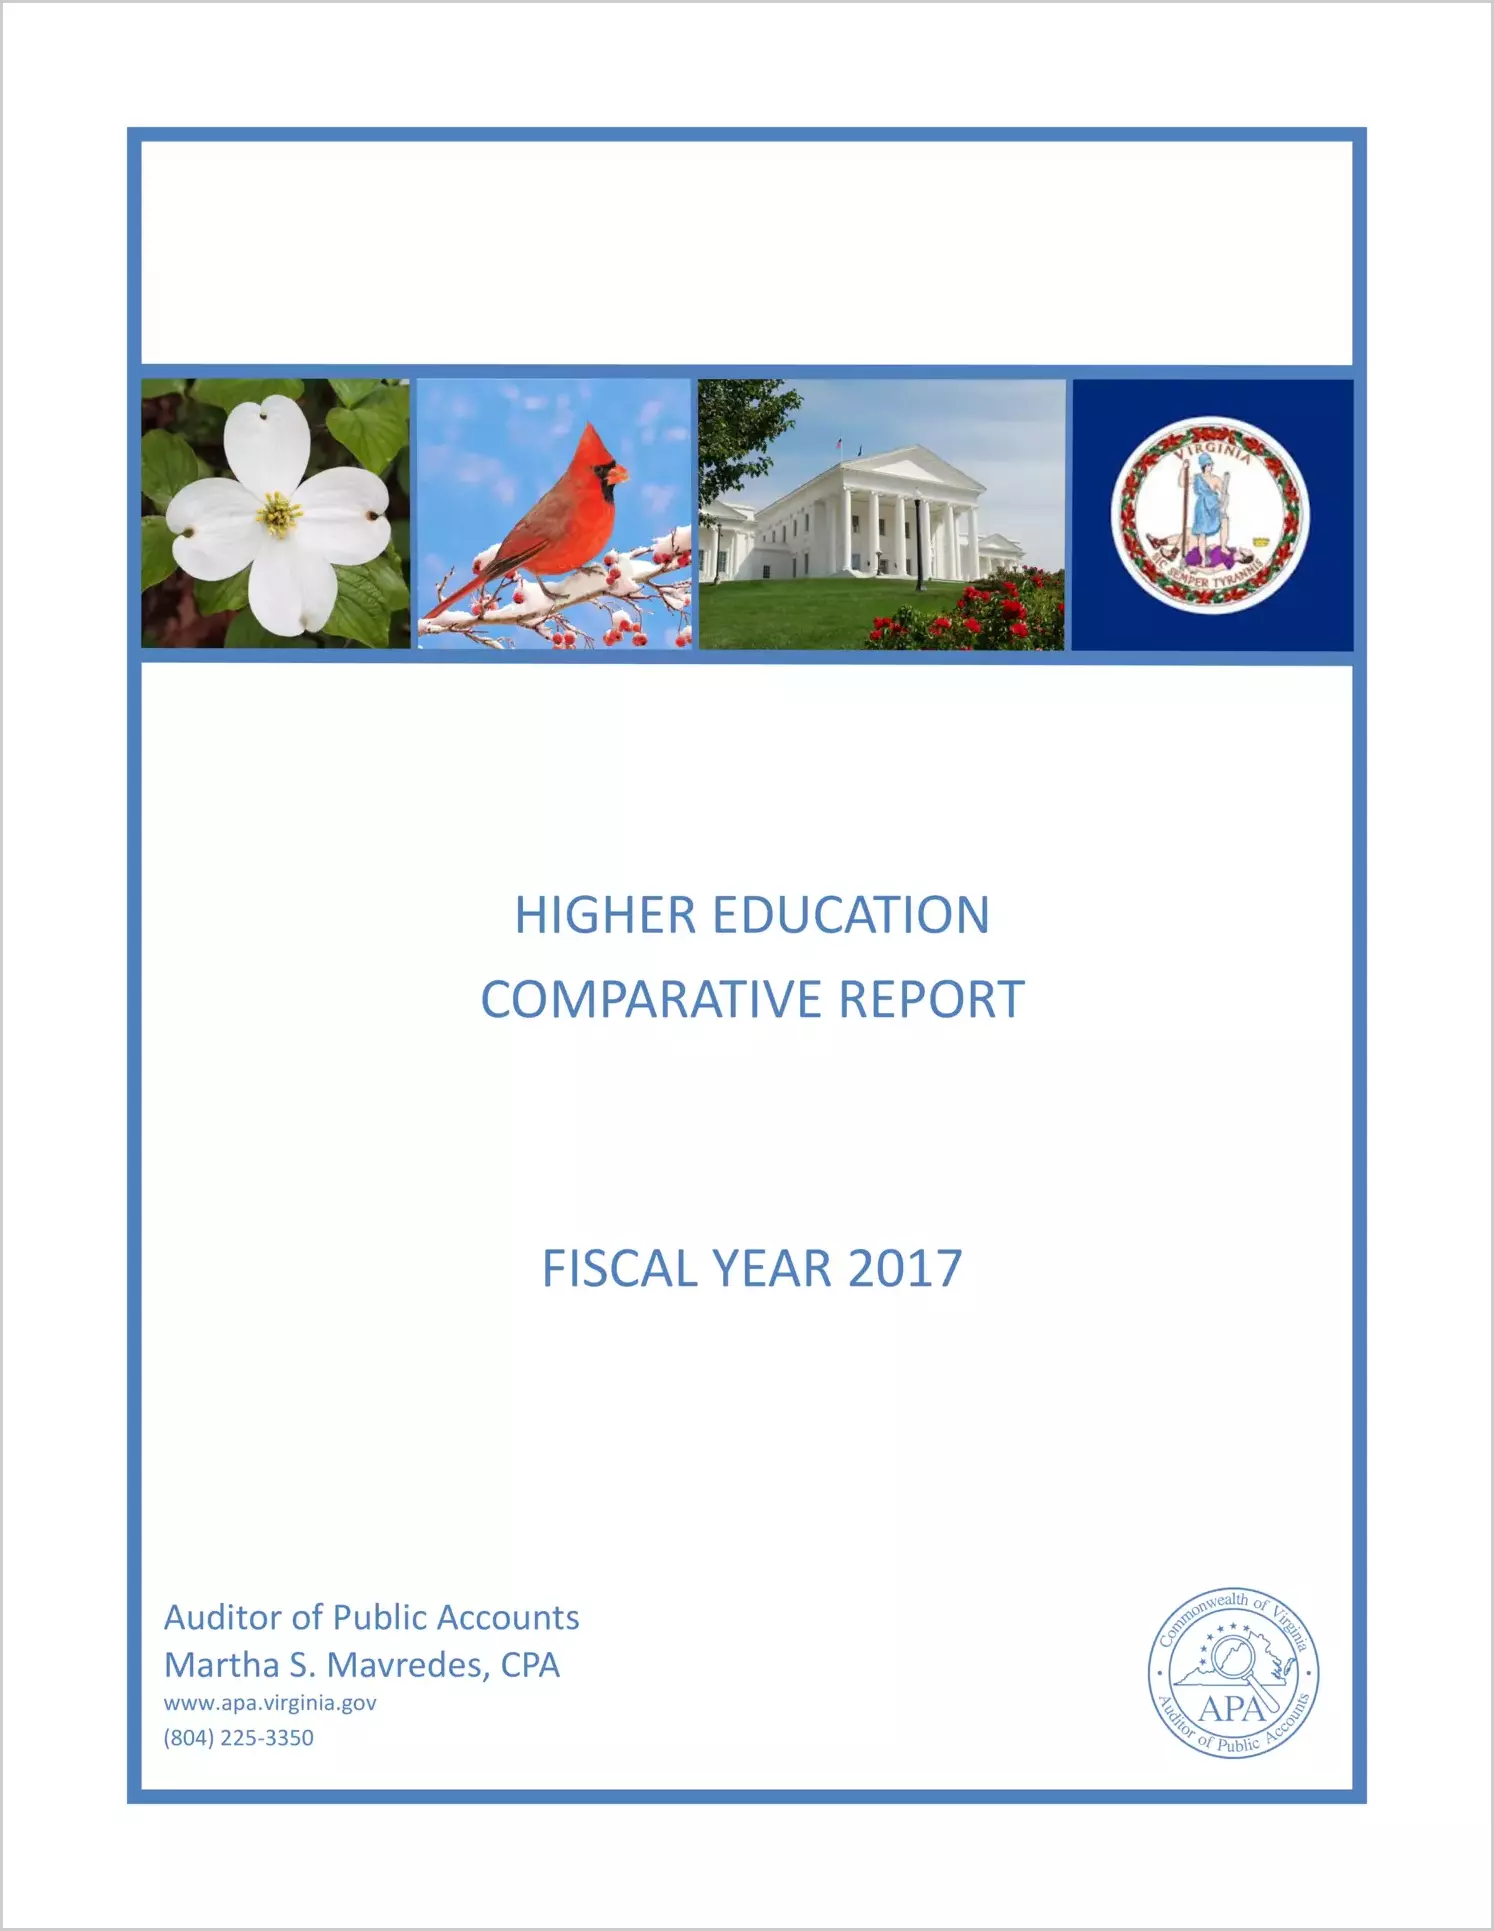 Higher Education Comparative Report - Fiscal Year 2017